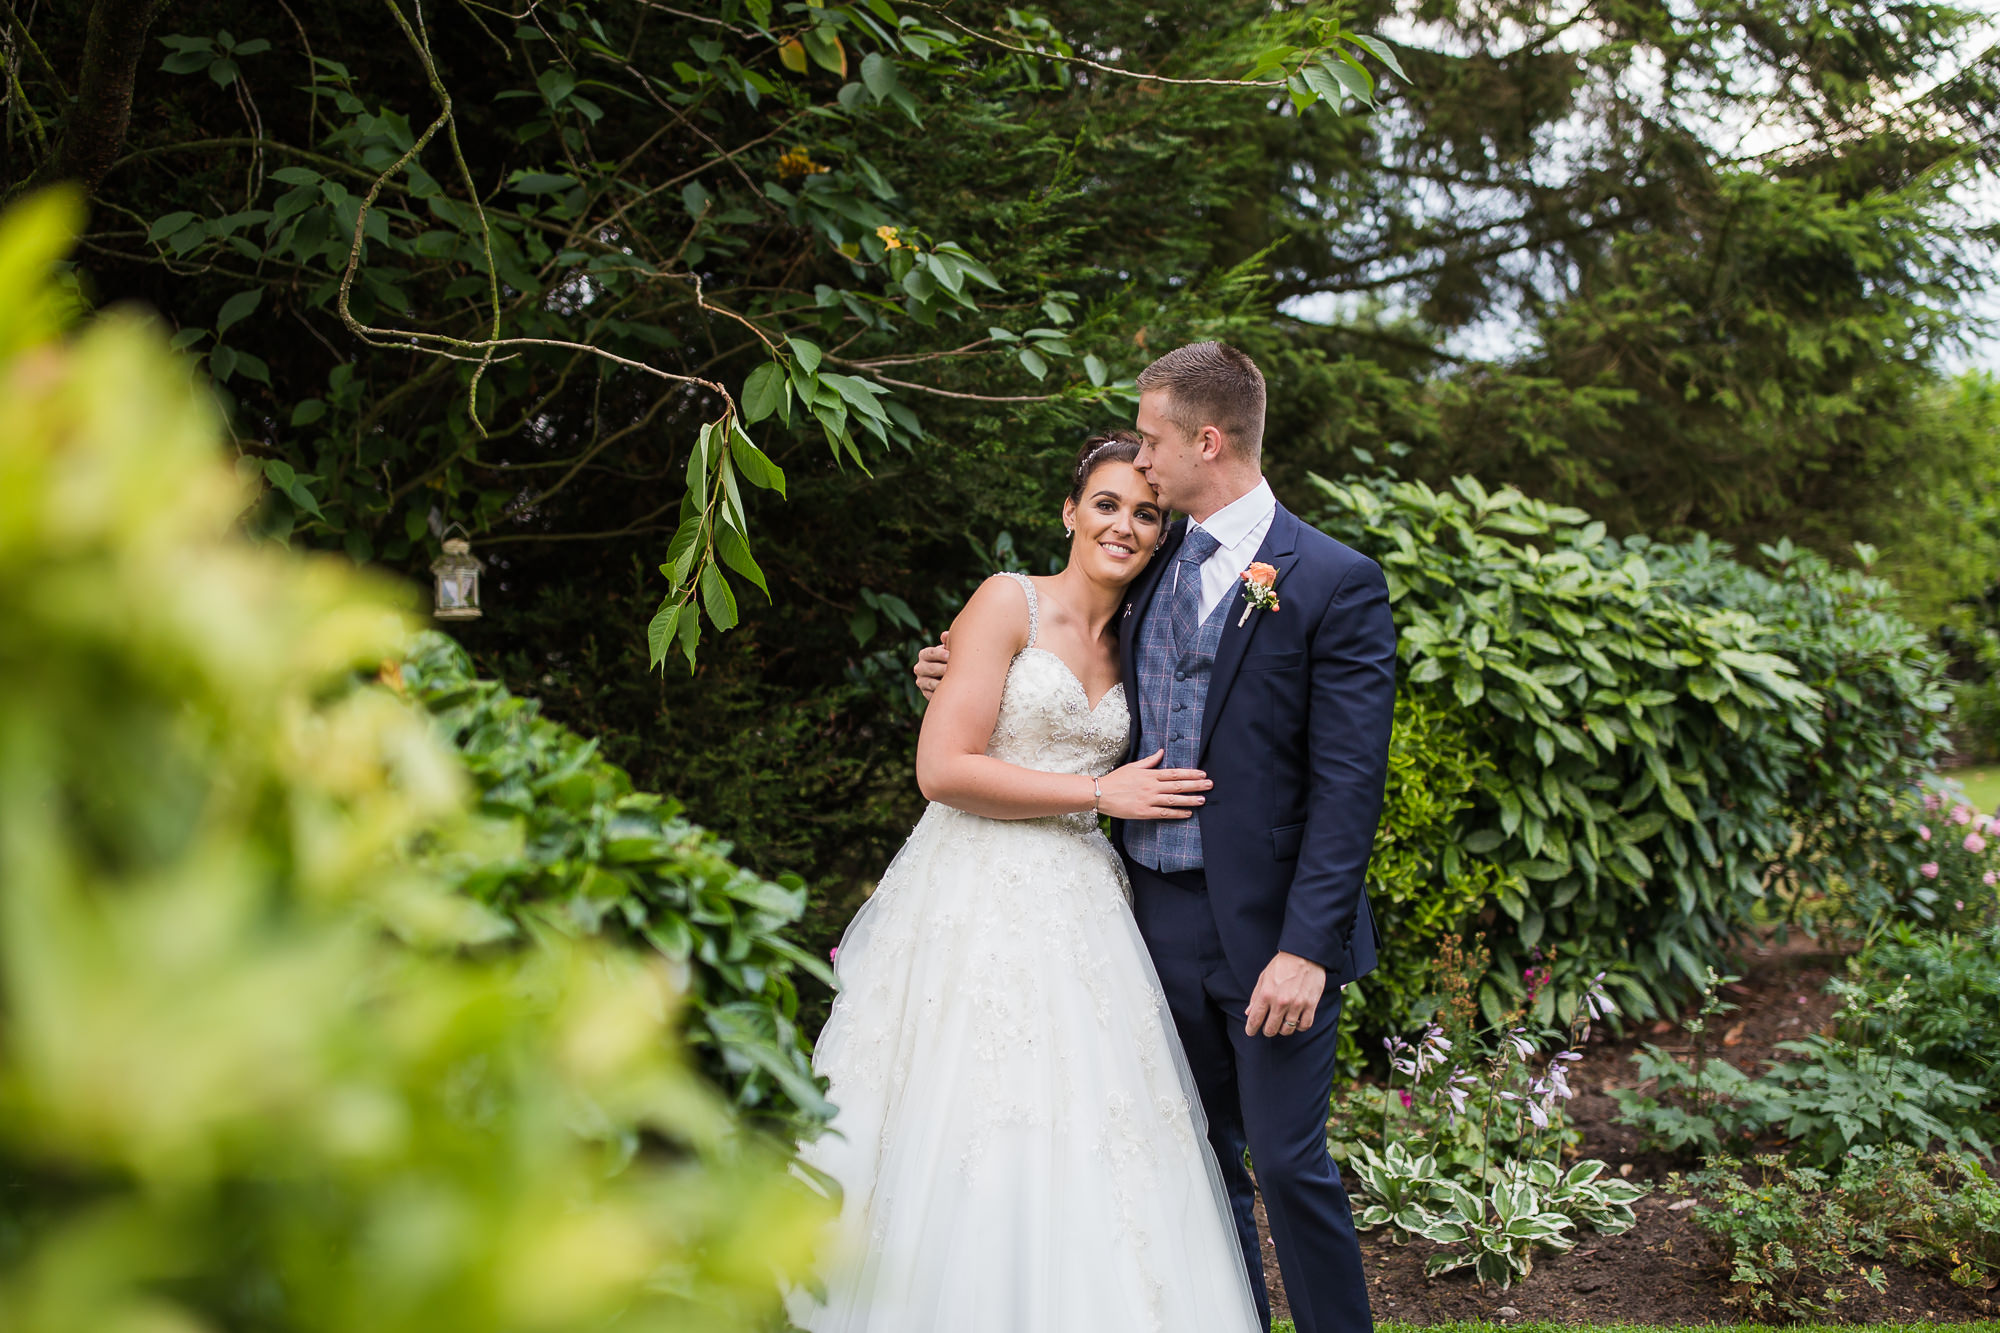 bride and groom portrait in the gardens after the rain at Shireburn Arms